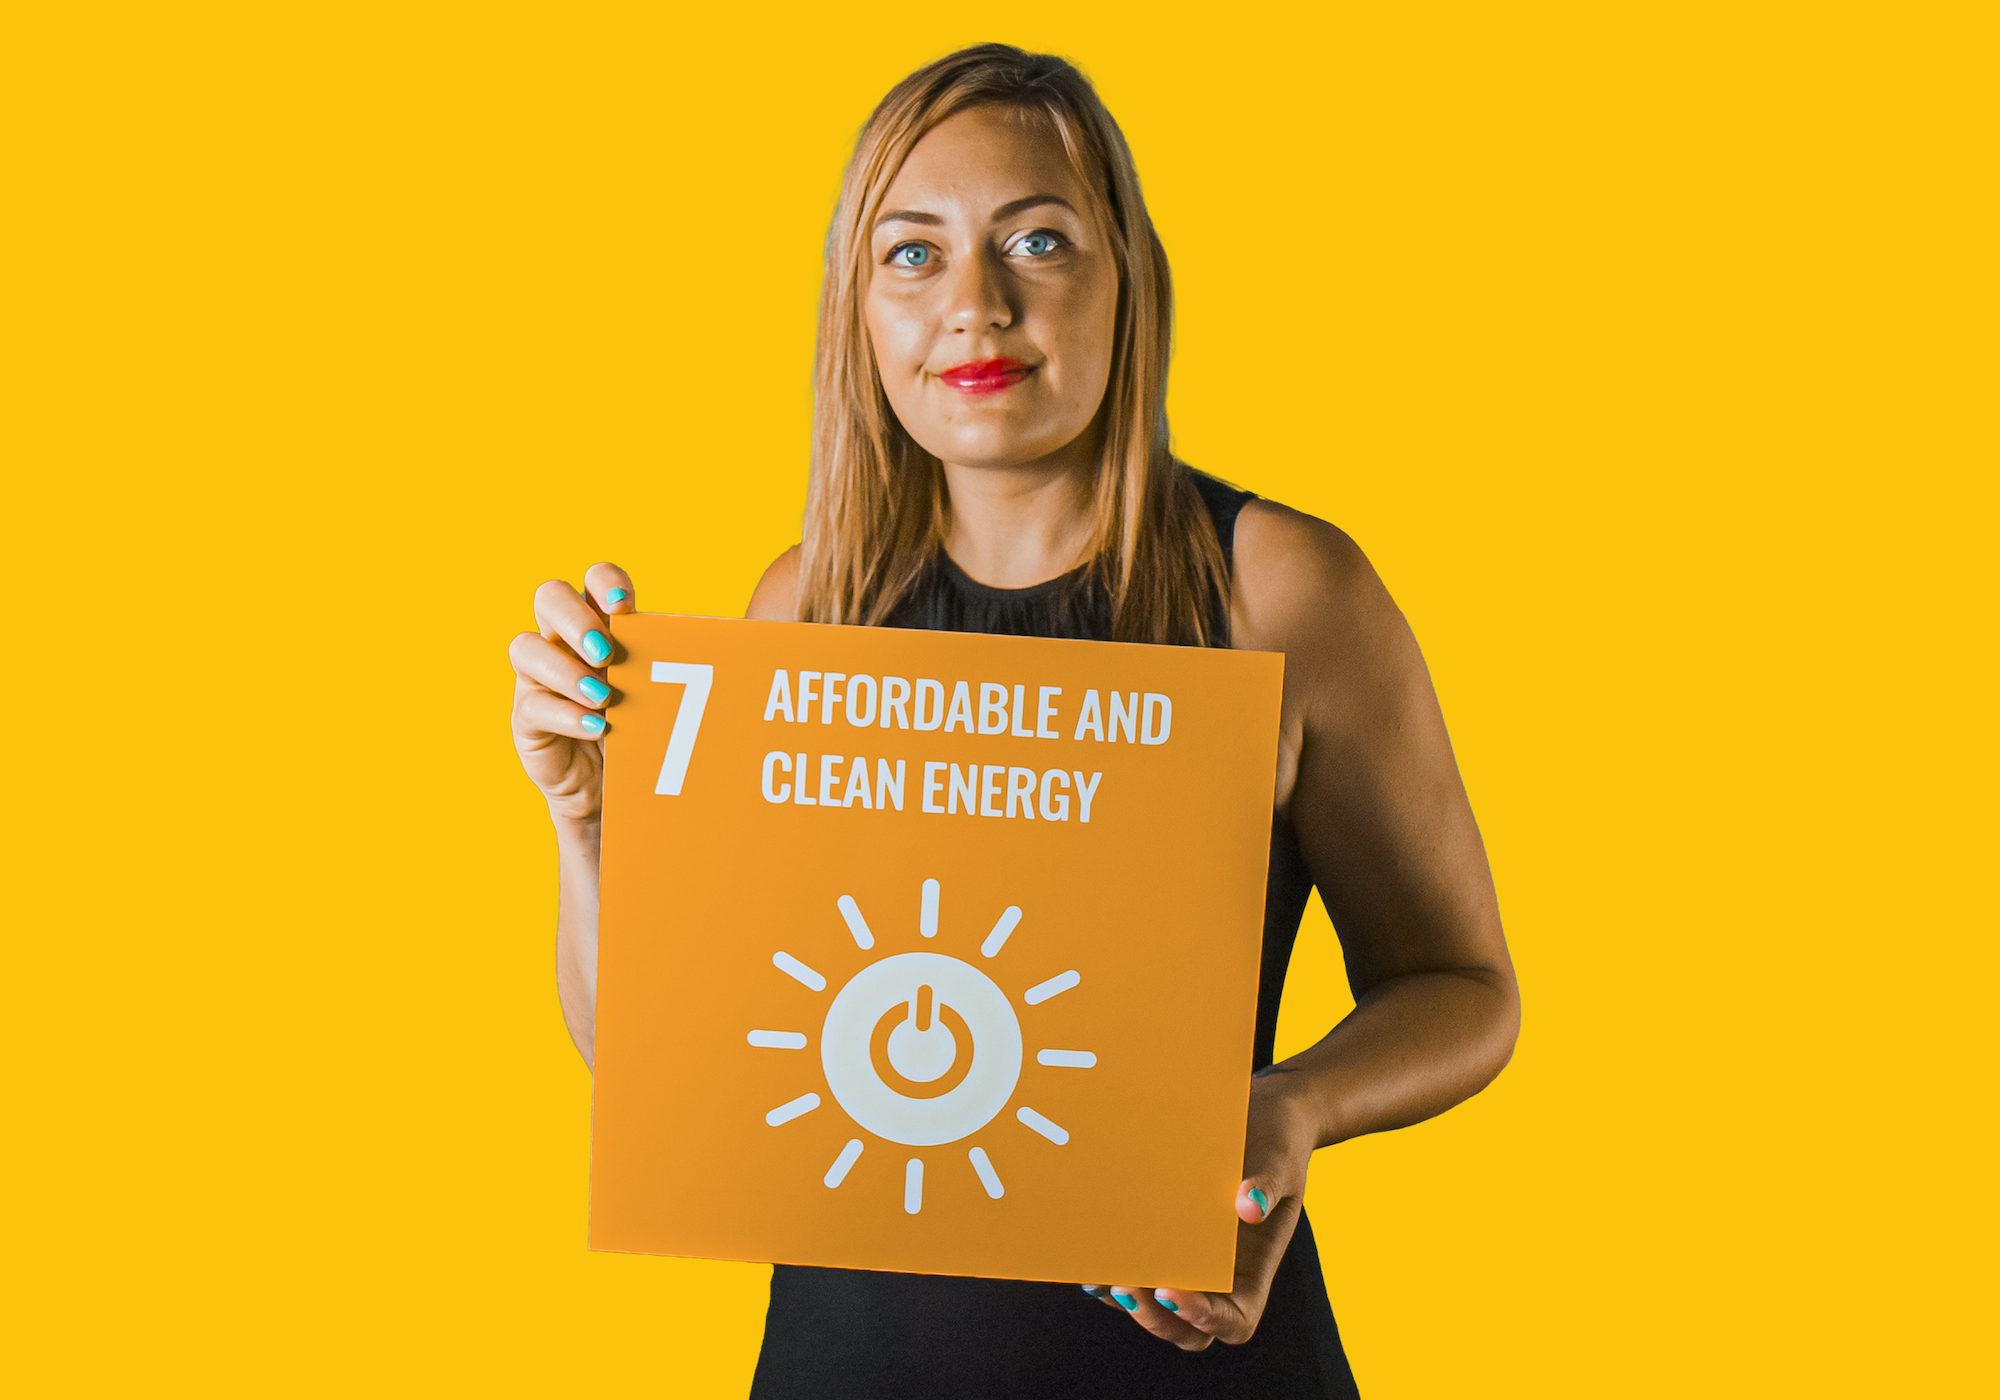 Woman holding up sign showing Global Sustainable Development Goal 7, affordable and clean energy.